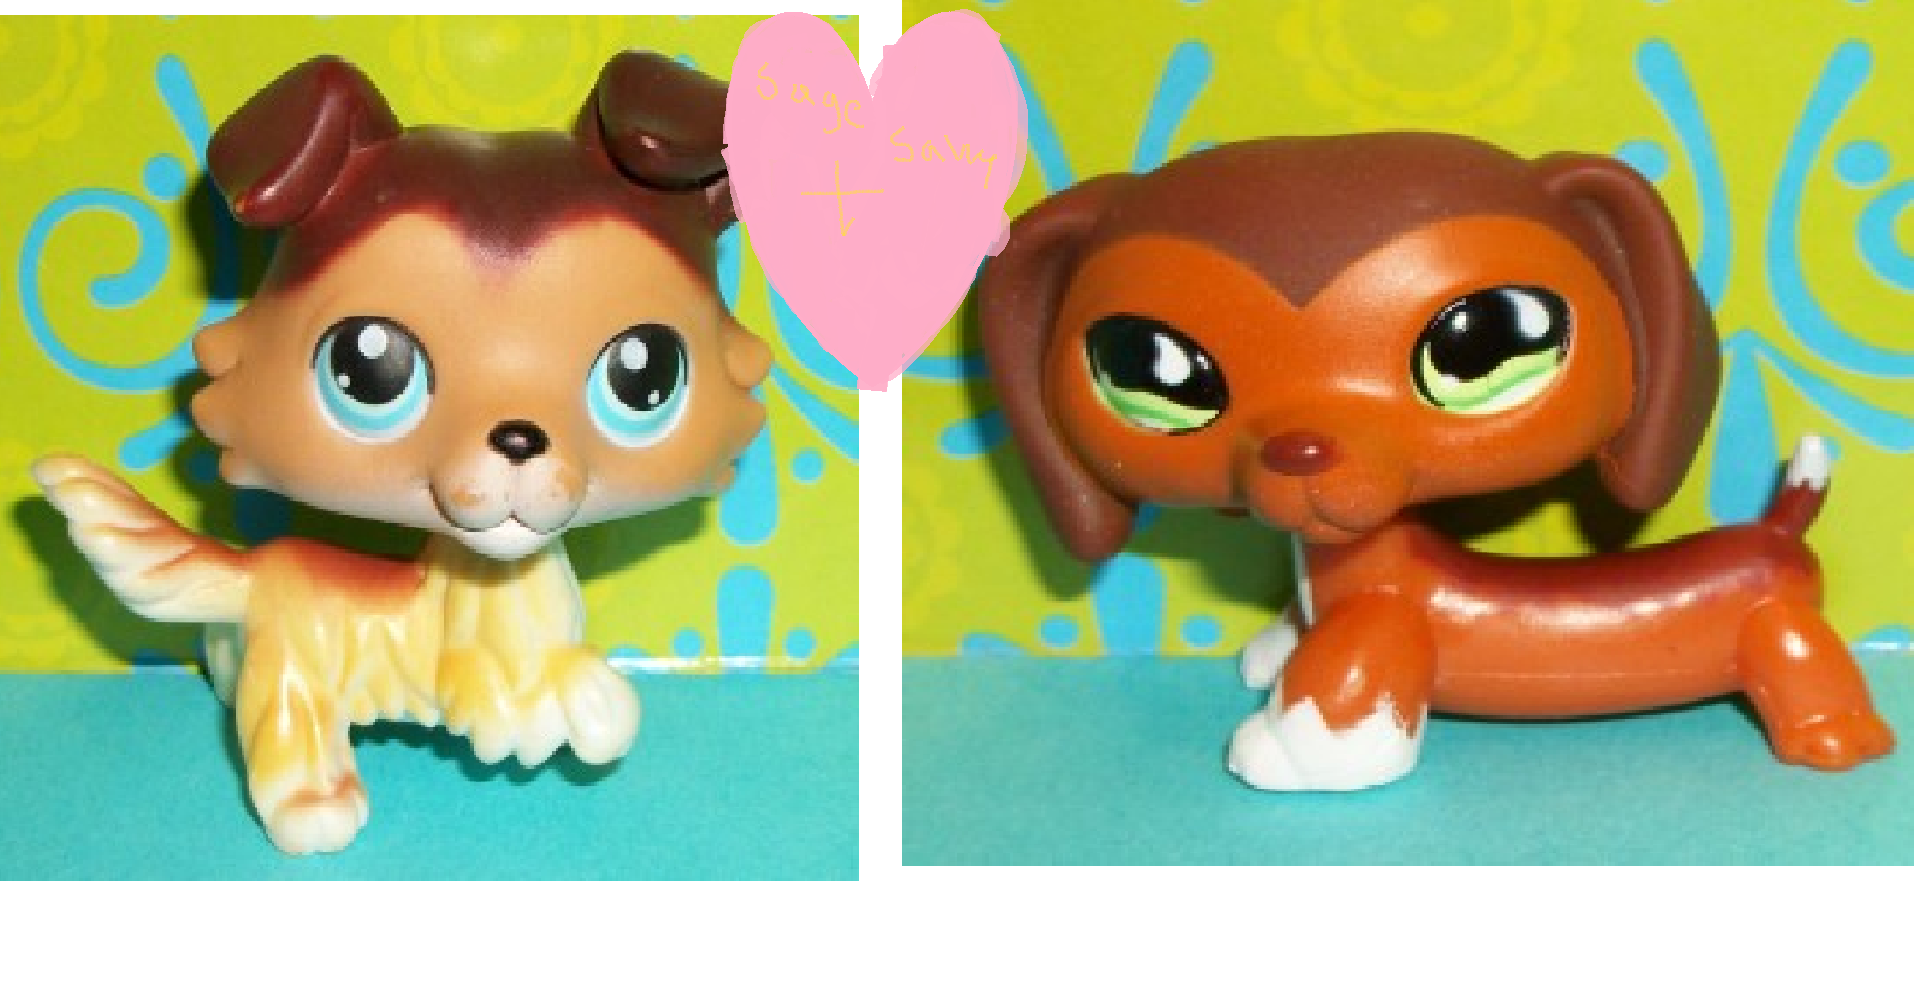 fan Art of sage + savvy for fans of Lps Popular, for Sophiegtv! 